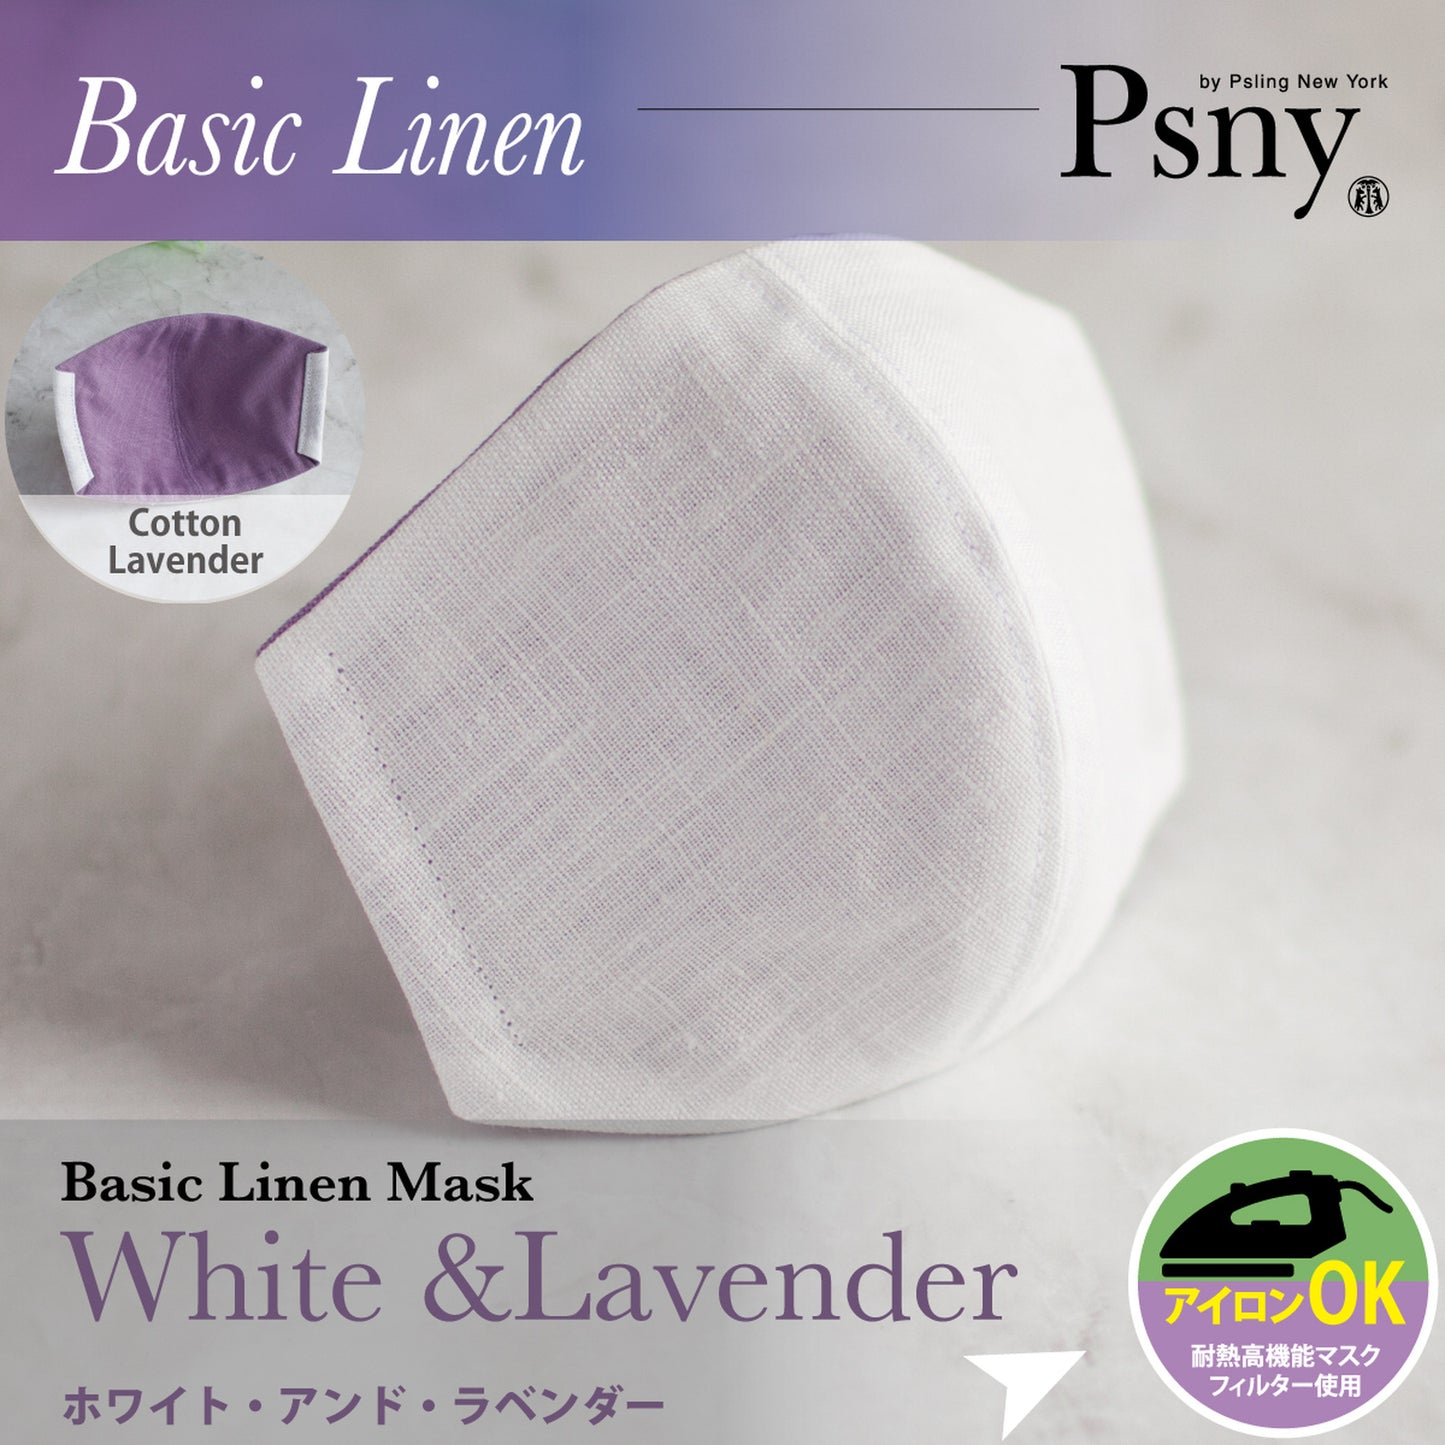 PSNY Free Shipping Basic Linen, White &amp; Lavender Summer Hemp Elegant Ceremonial Occasion Clean Beautiful Elegant Commuting Luxury Mask Adult Beauty Pollen Non-Woven Filter Included 3D Adult Mask BL06